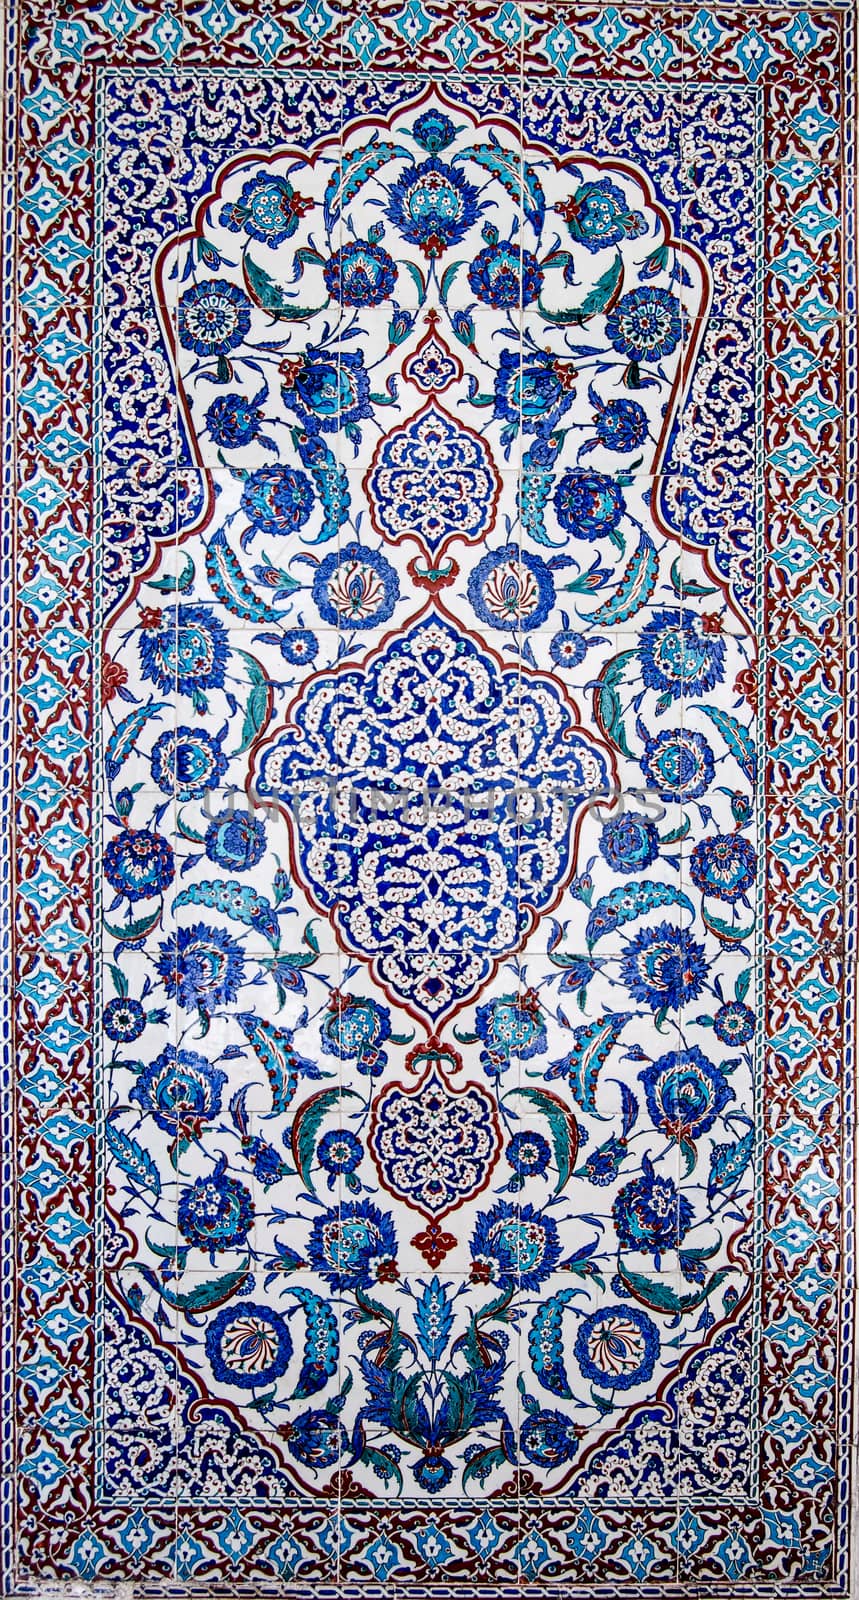 Beautiful Iznik tiles decorating the exterior of the tomb of Sultan Murad II constructed in 1599 and still on public display in the old city of Istanbul, Turkey.